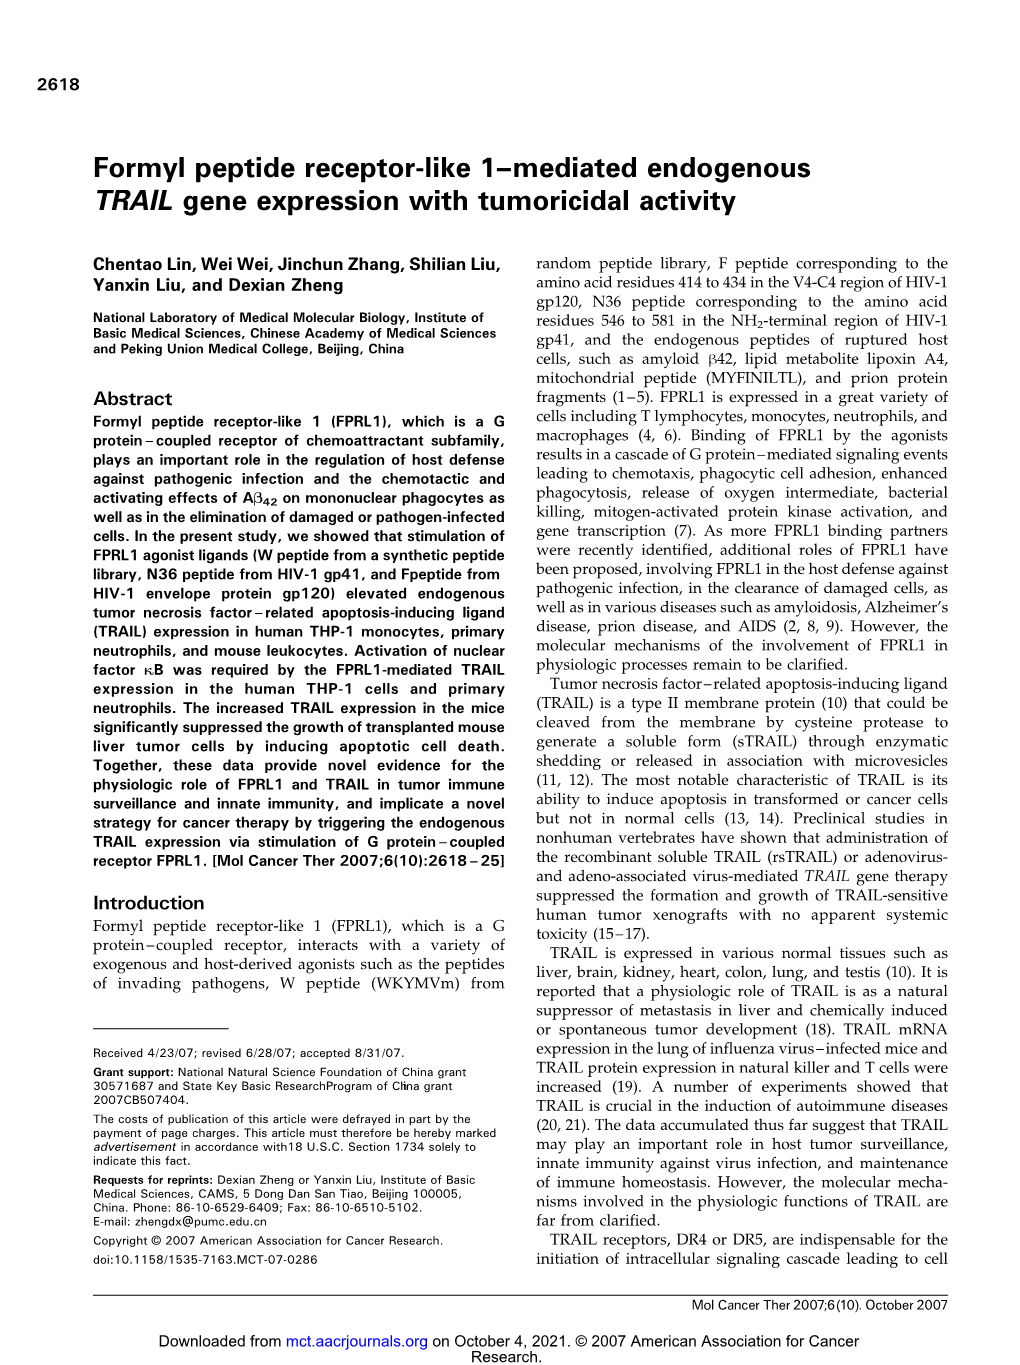 Formyl Peptide Receptor-Like 1–Mediated Endogenous TRAIL Gene Expression with Tumoricidal Activity